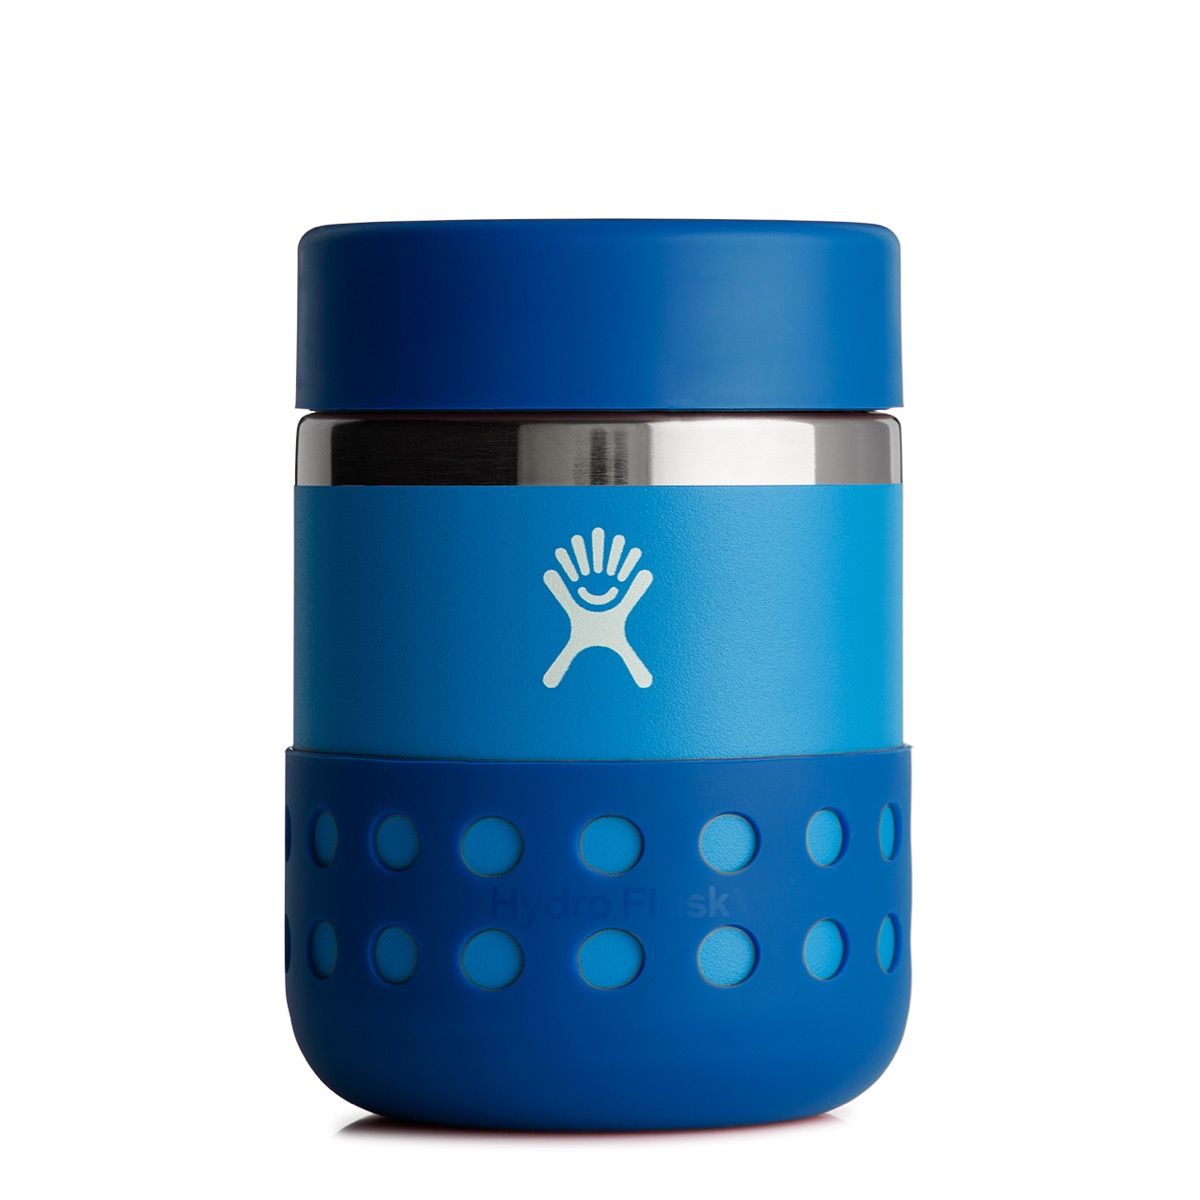 12oz Kid's Hydroflask Insulated Food Flask - Ice Blue - 810028843943